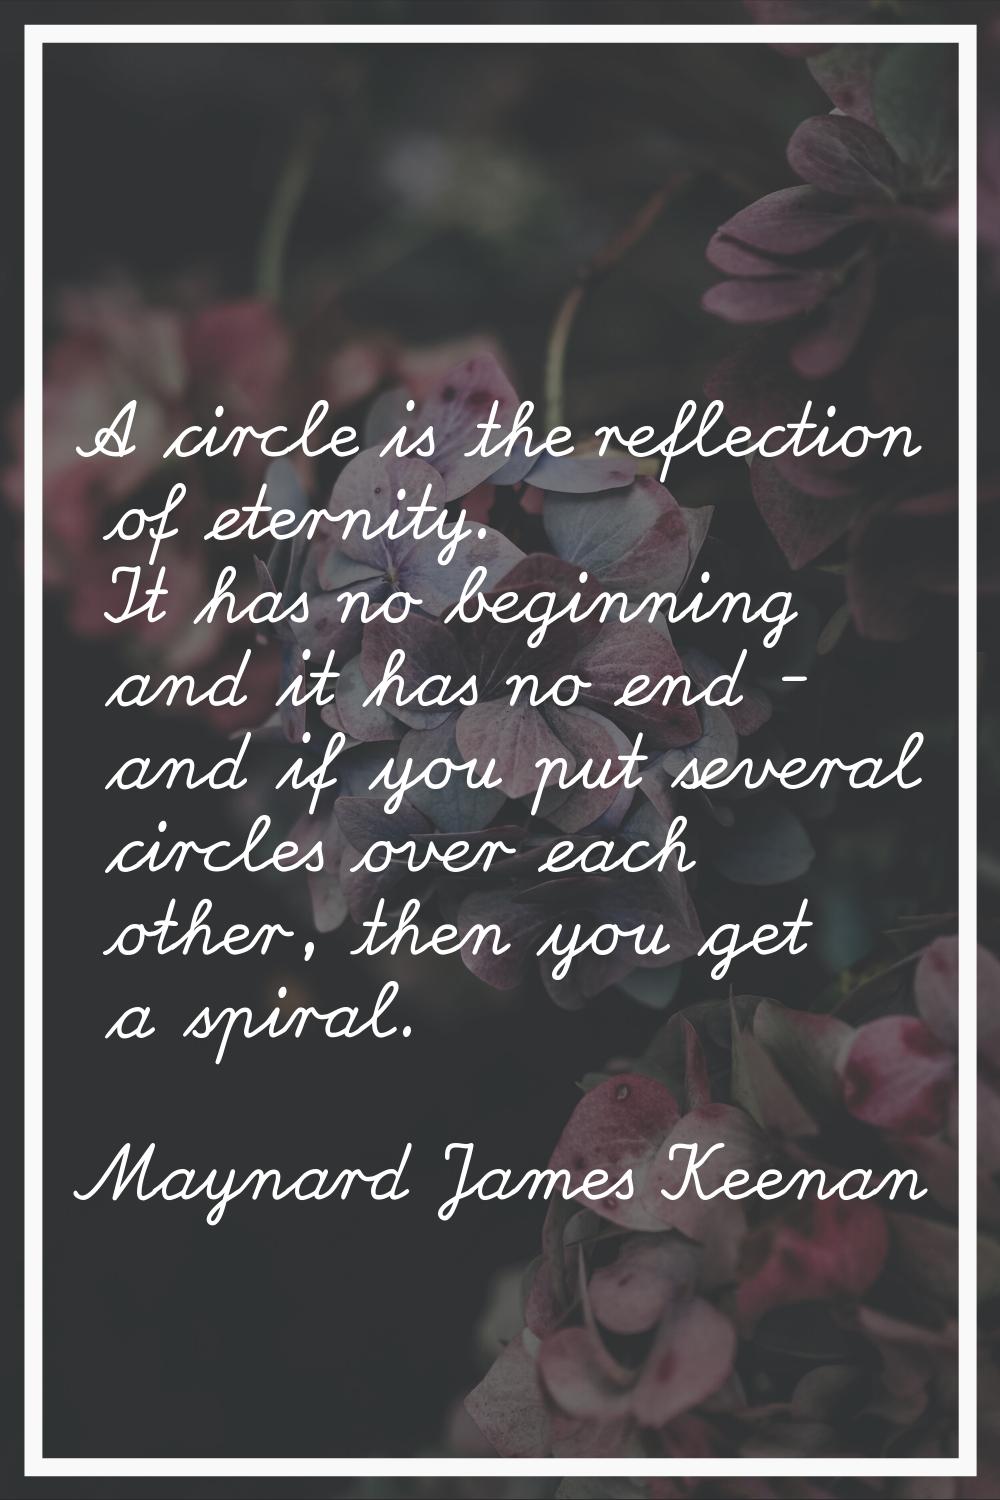 A circle is the reflection of eternity. It has no beginning and it has no end - and if you put seve